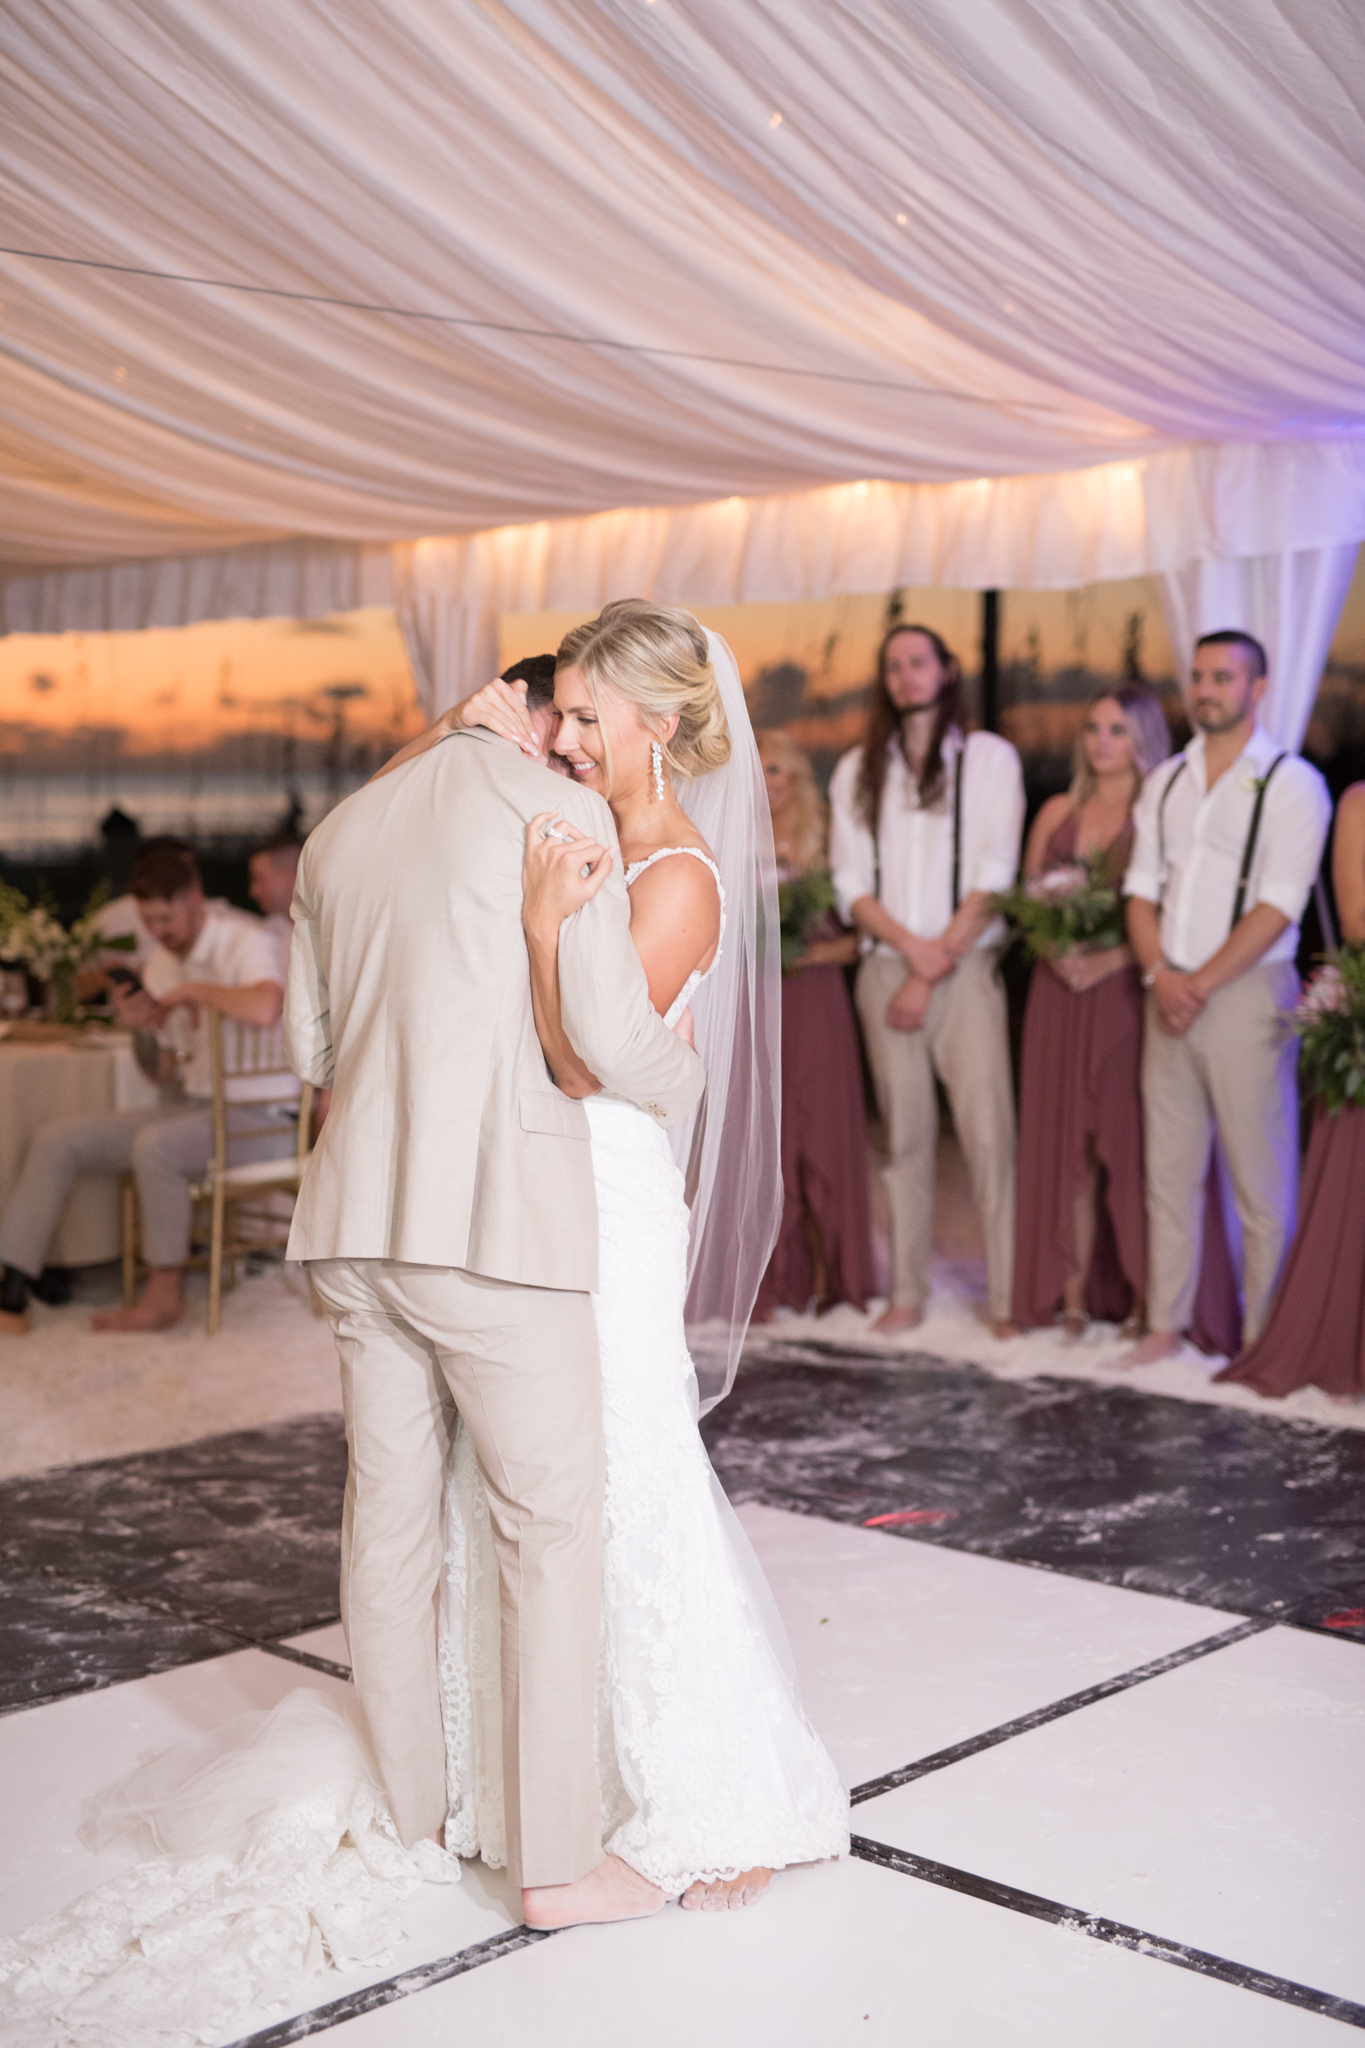 Bride and groom embrace during first dance.